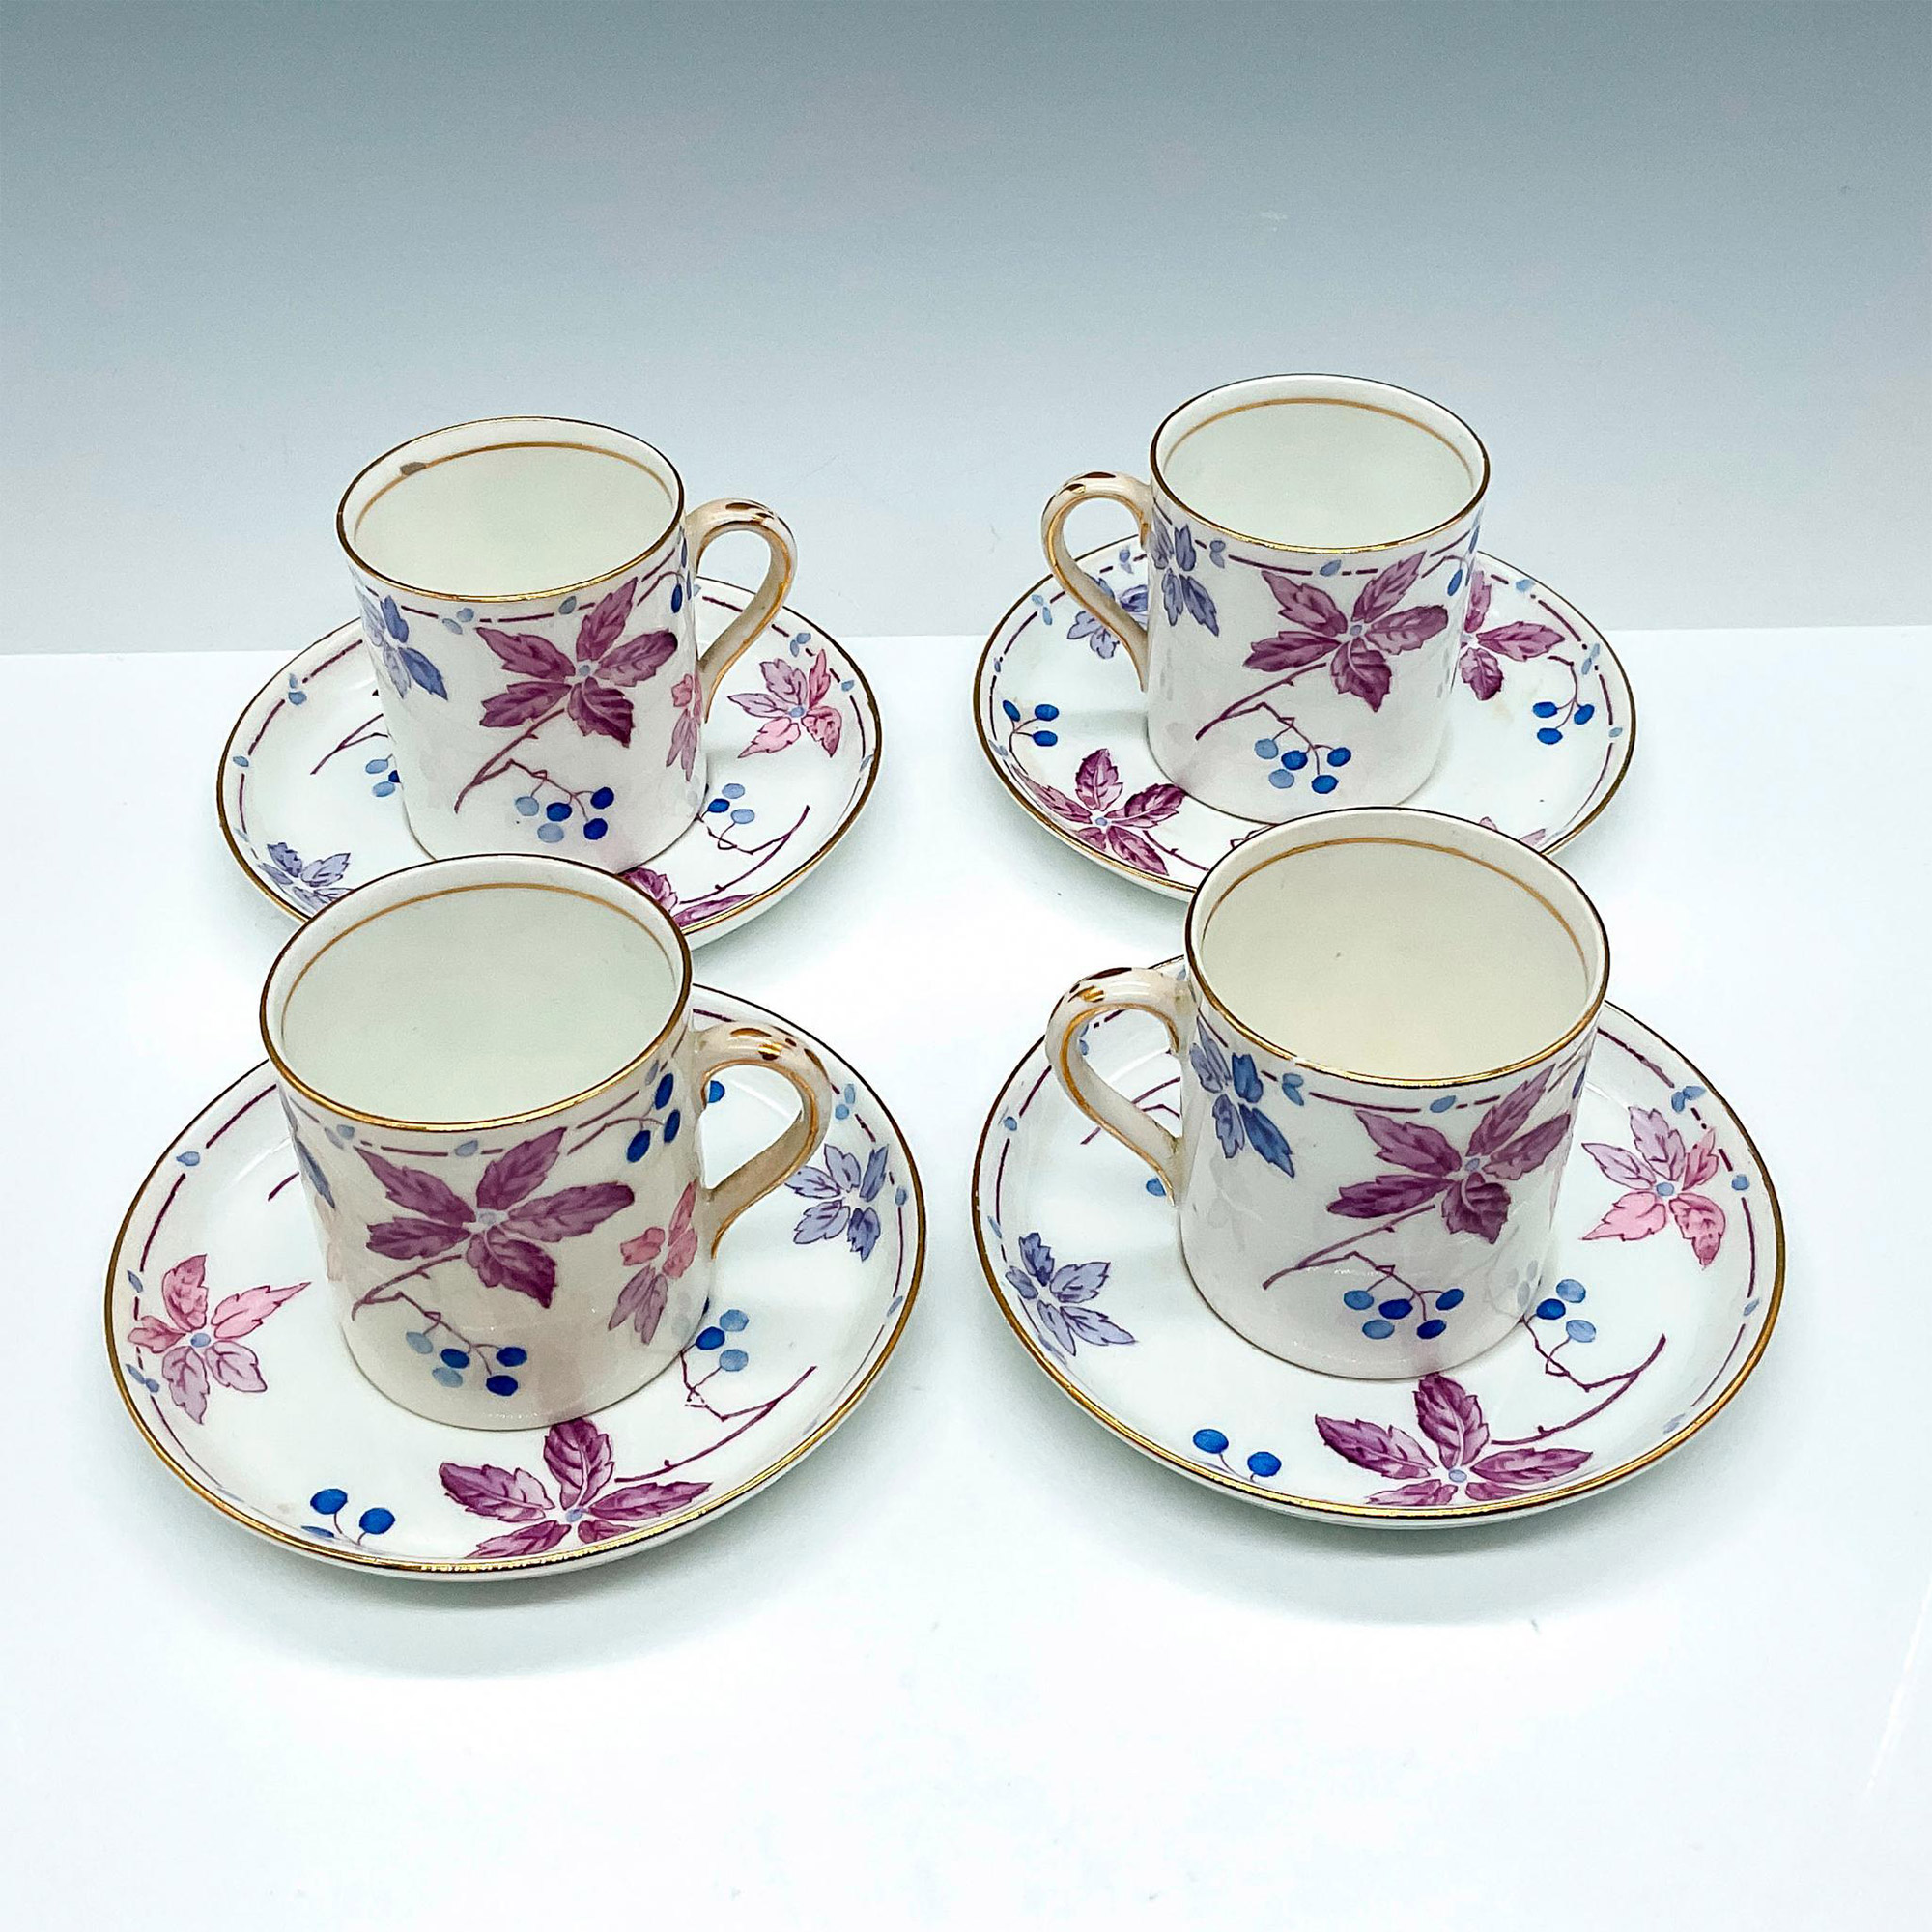 8pc Foley China Demitasse Cups and Saucers